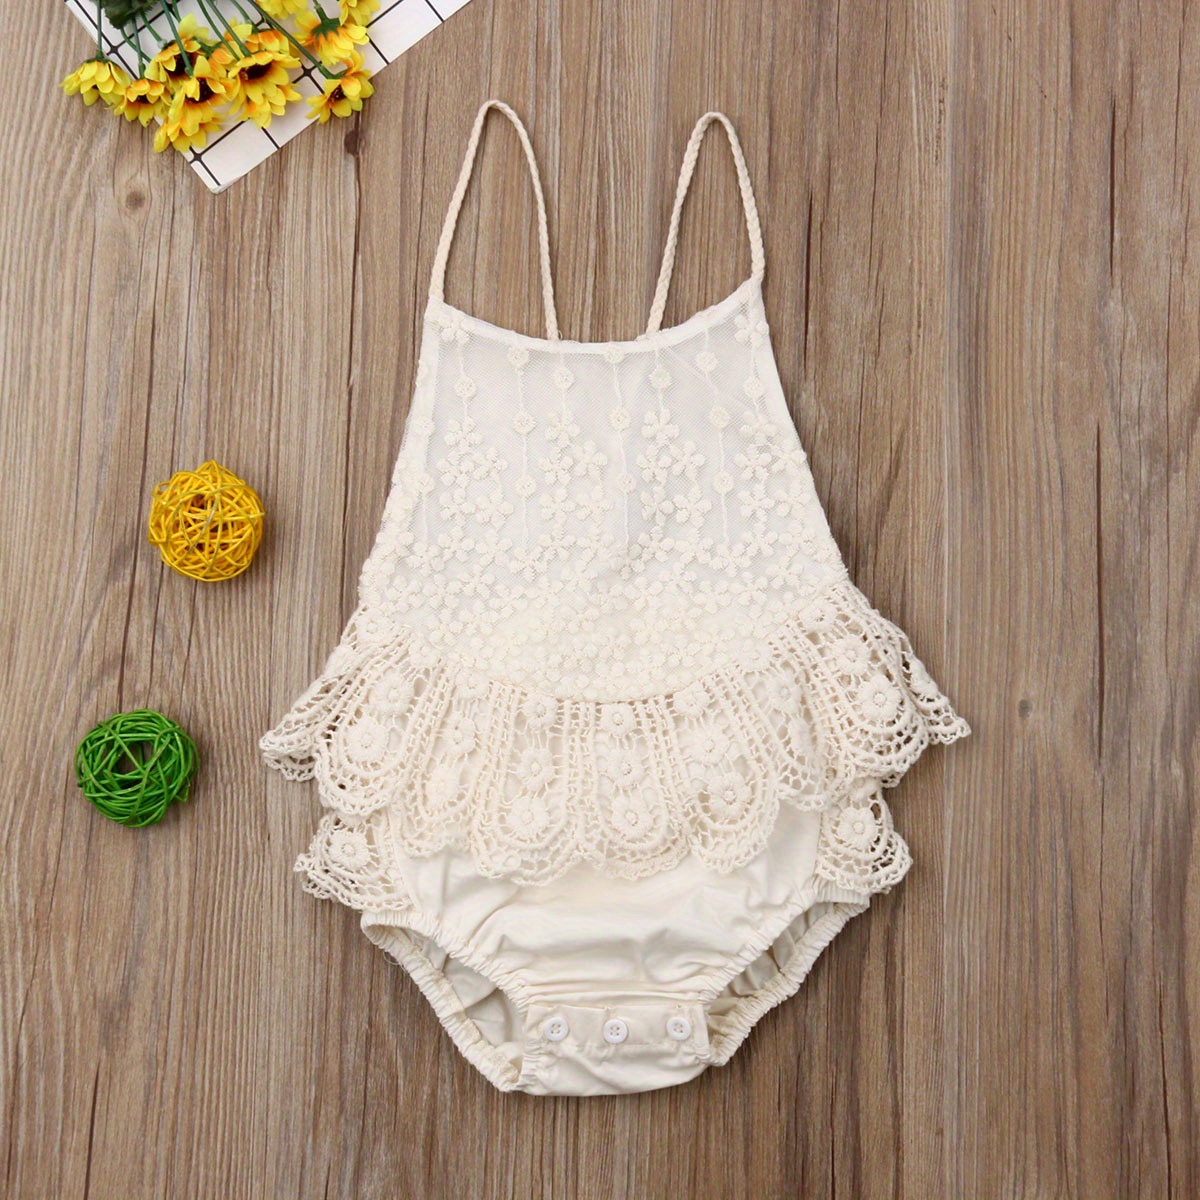 

0-18m Infant Baby Girls Summer Romper, Sling Floral Lace Back Adjustable Straps Outfit, Waist Elastic Band Hollow Back One-piece Jumpsuit